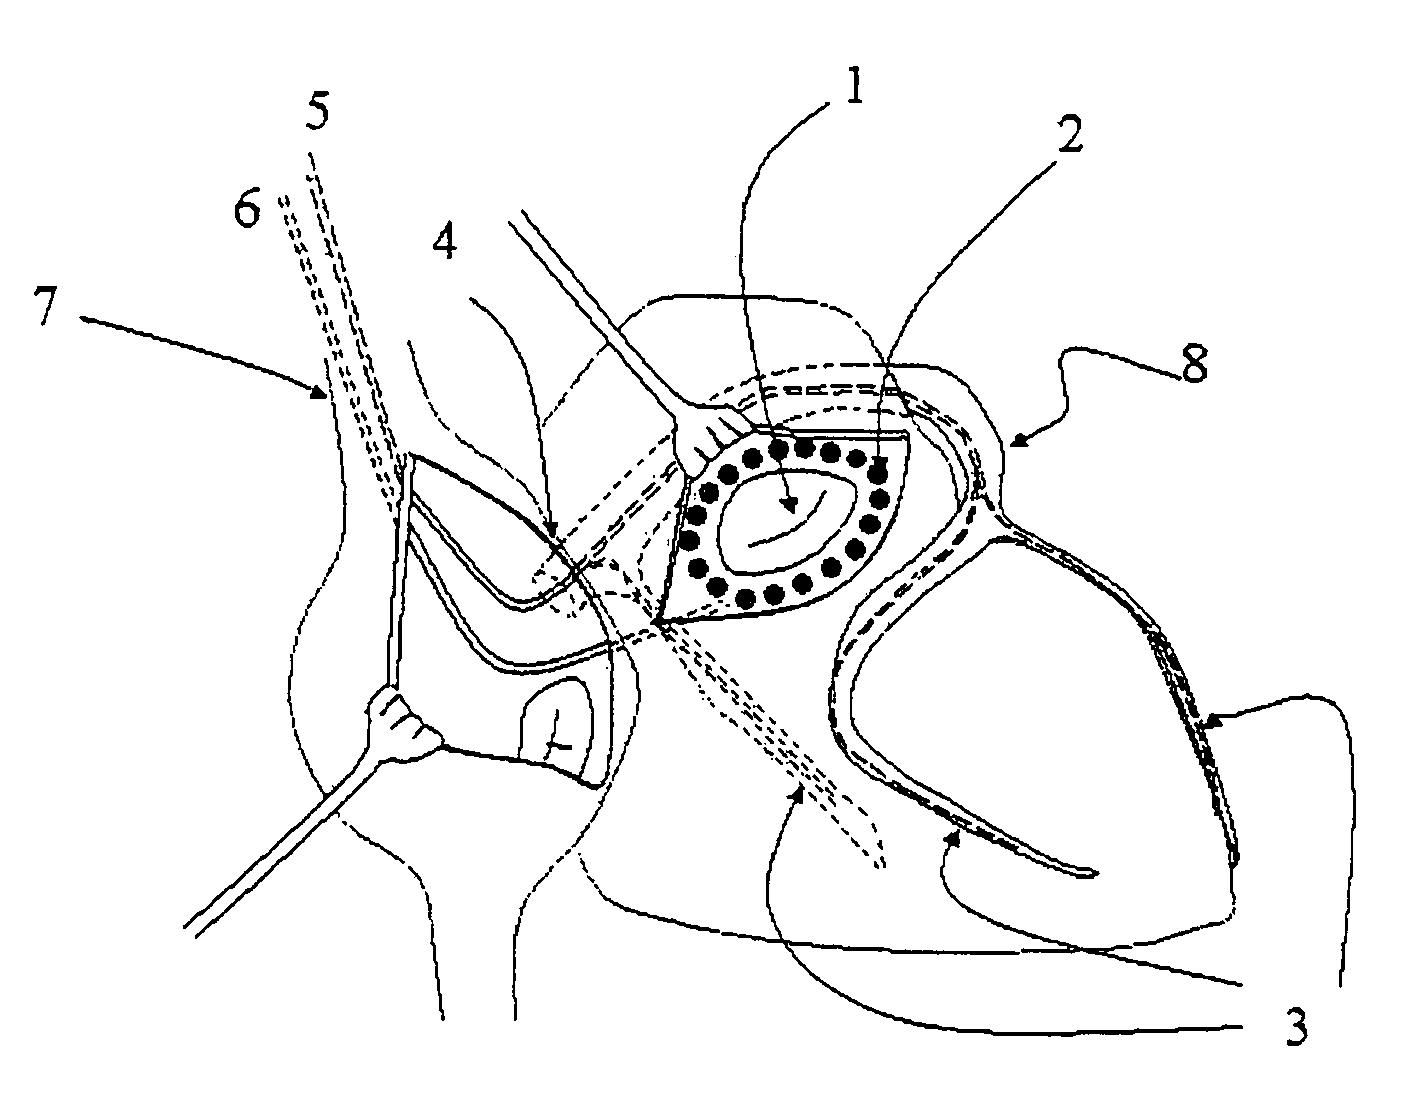 Methods and devices for modulation of heart valve function